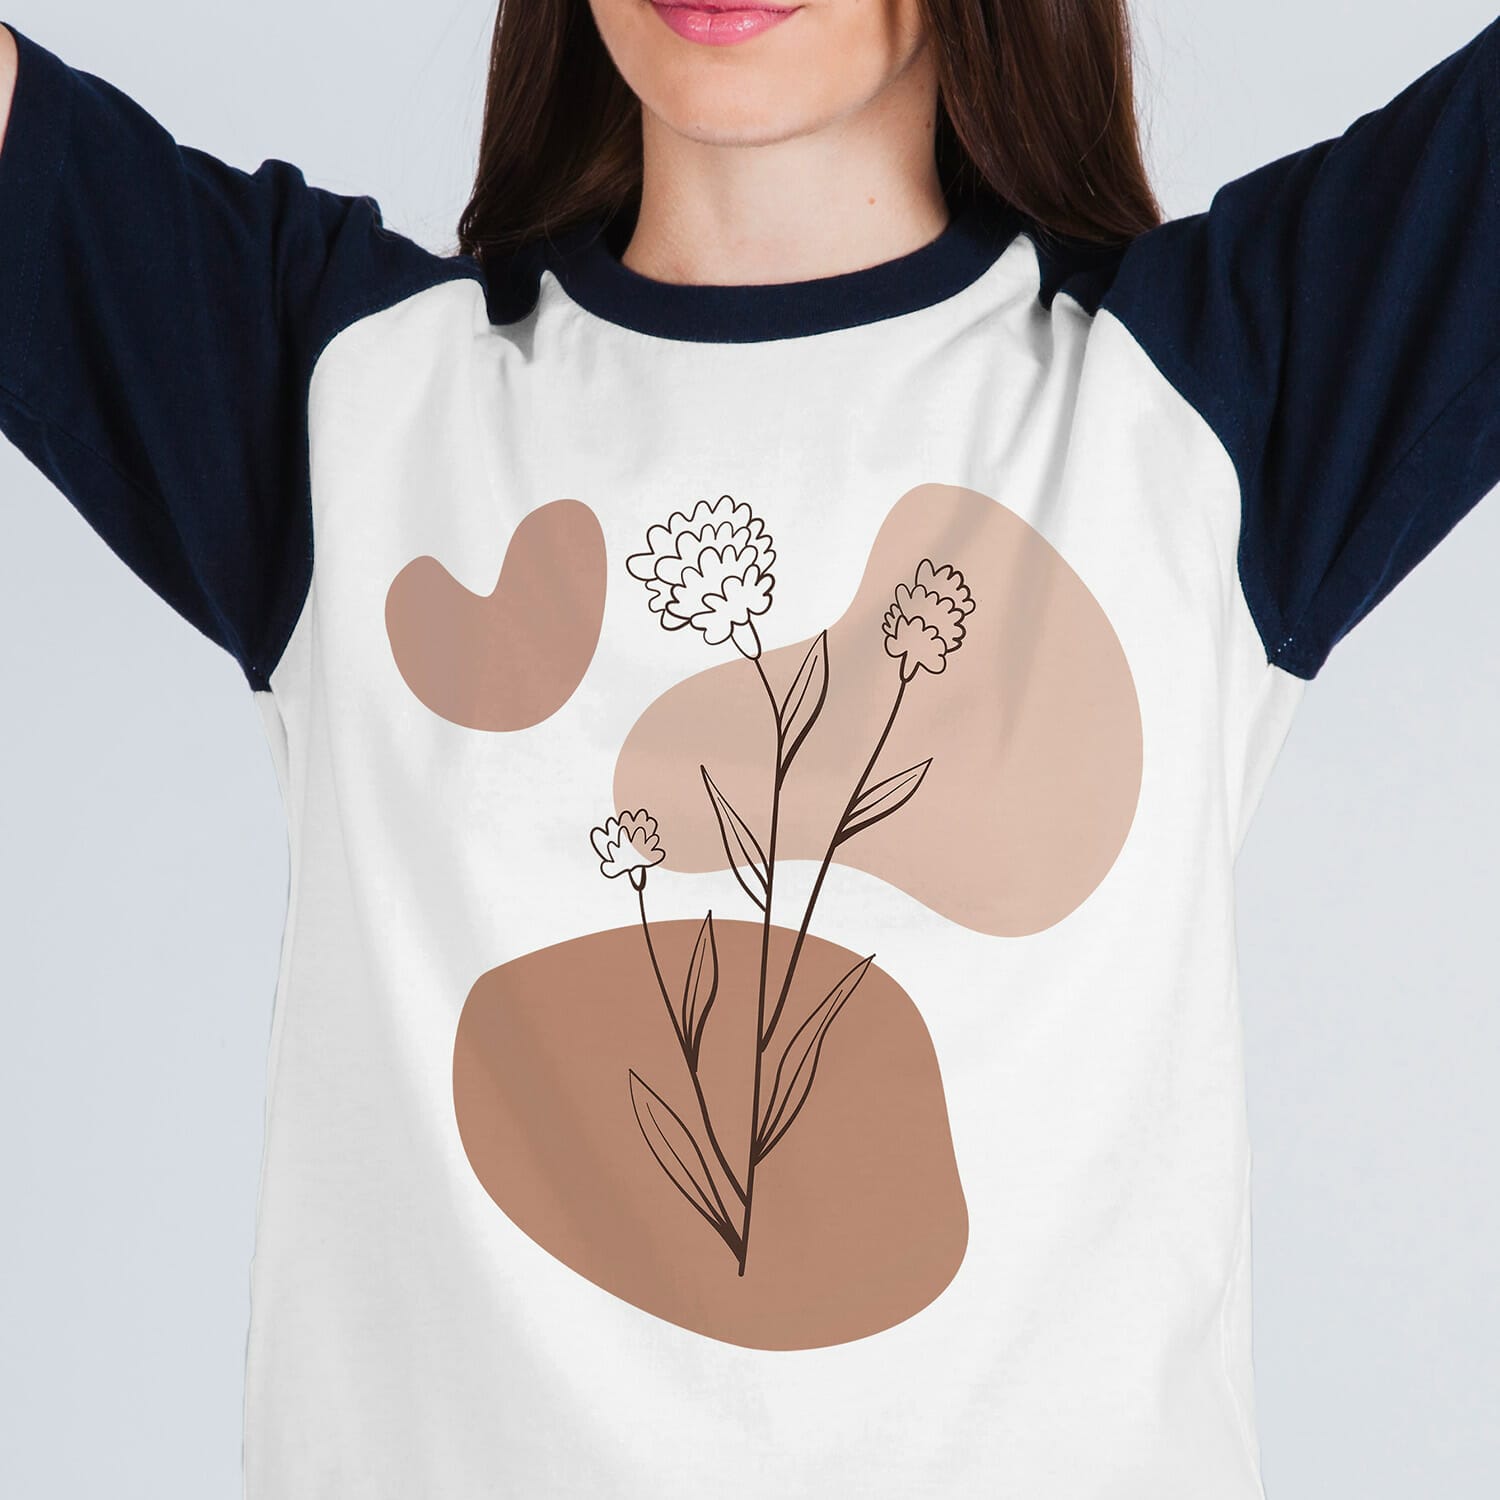 Abstract Floral Tshirt Design For Women